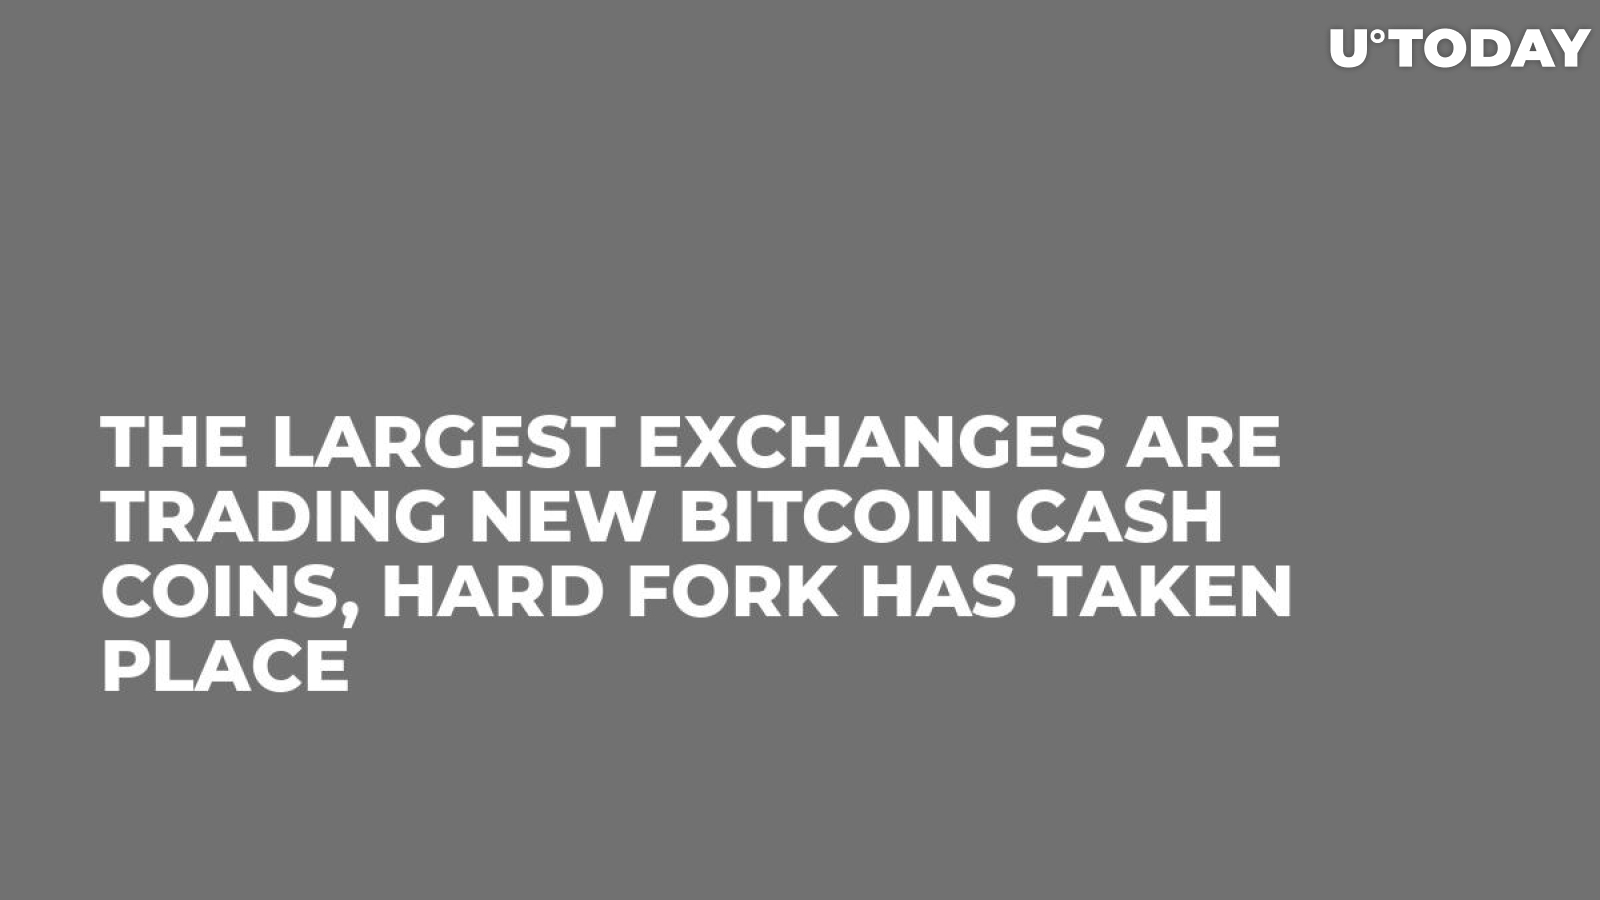 The Largest Exchanges Are Trading New Bitcoin Cash Coins, Hard Fork Has Taken Place